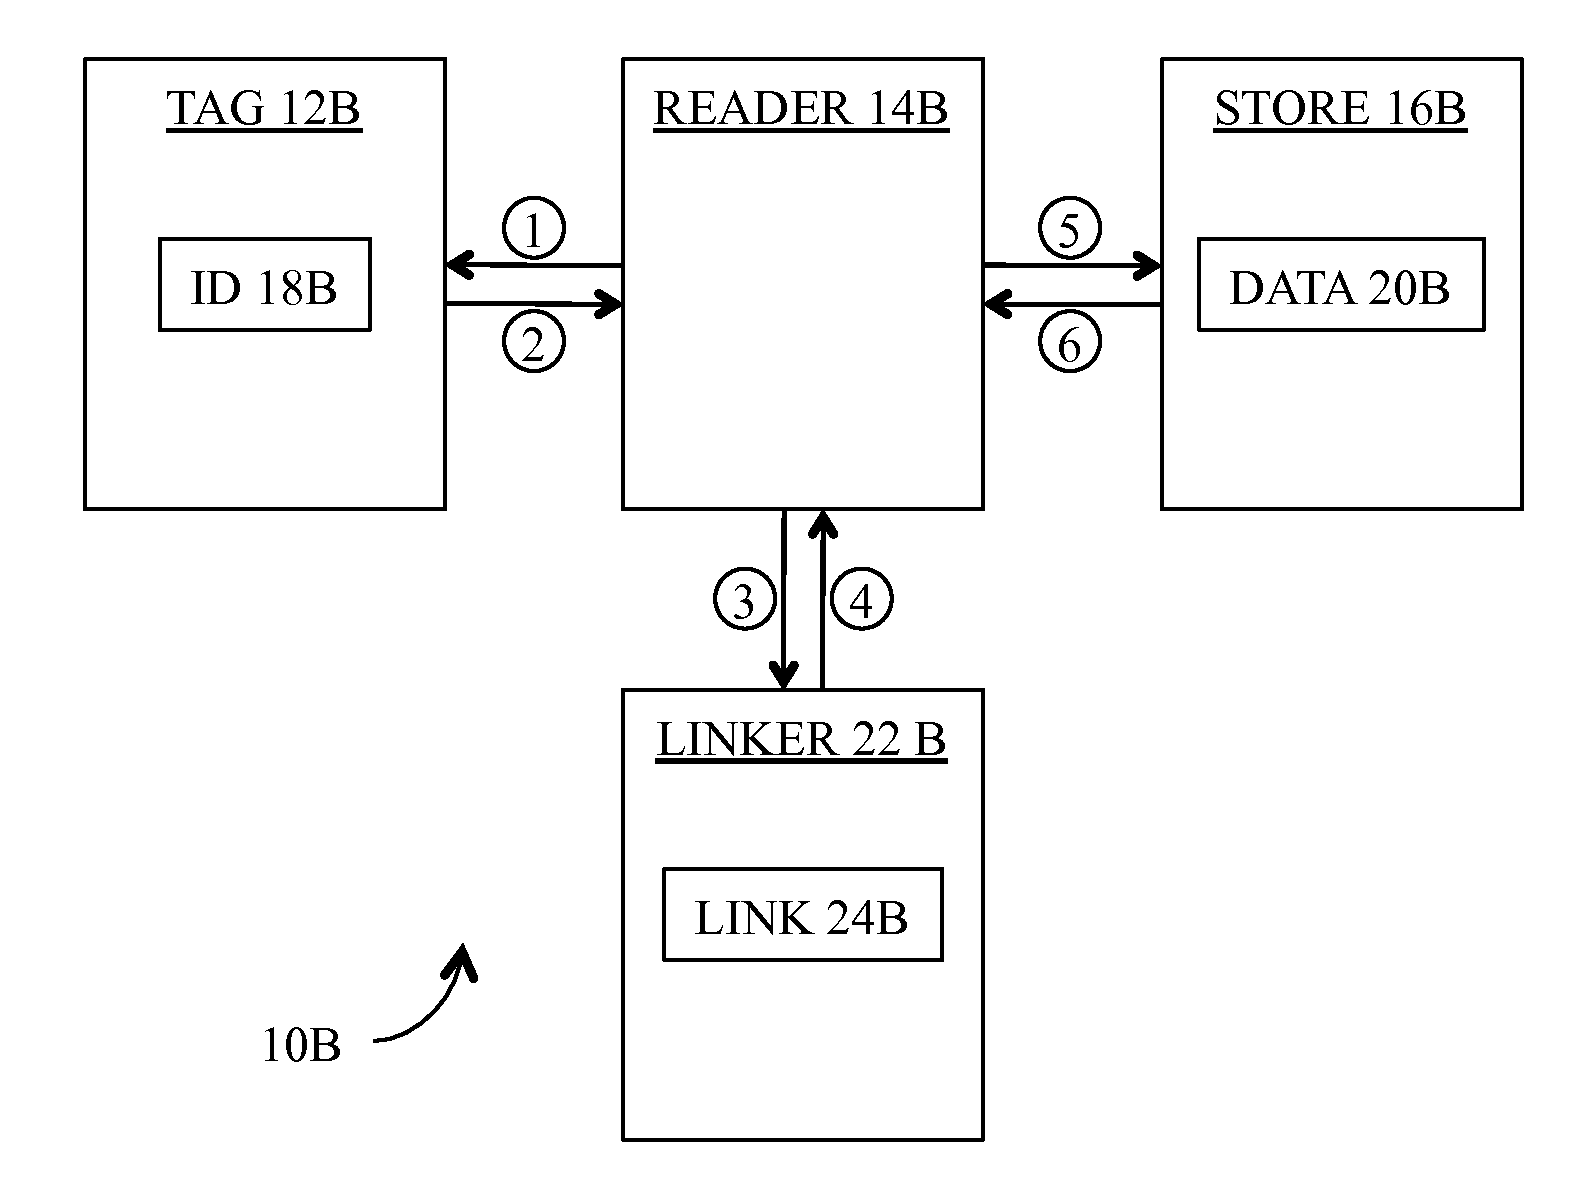 Method and apparatus for authenticating RFID tags